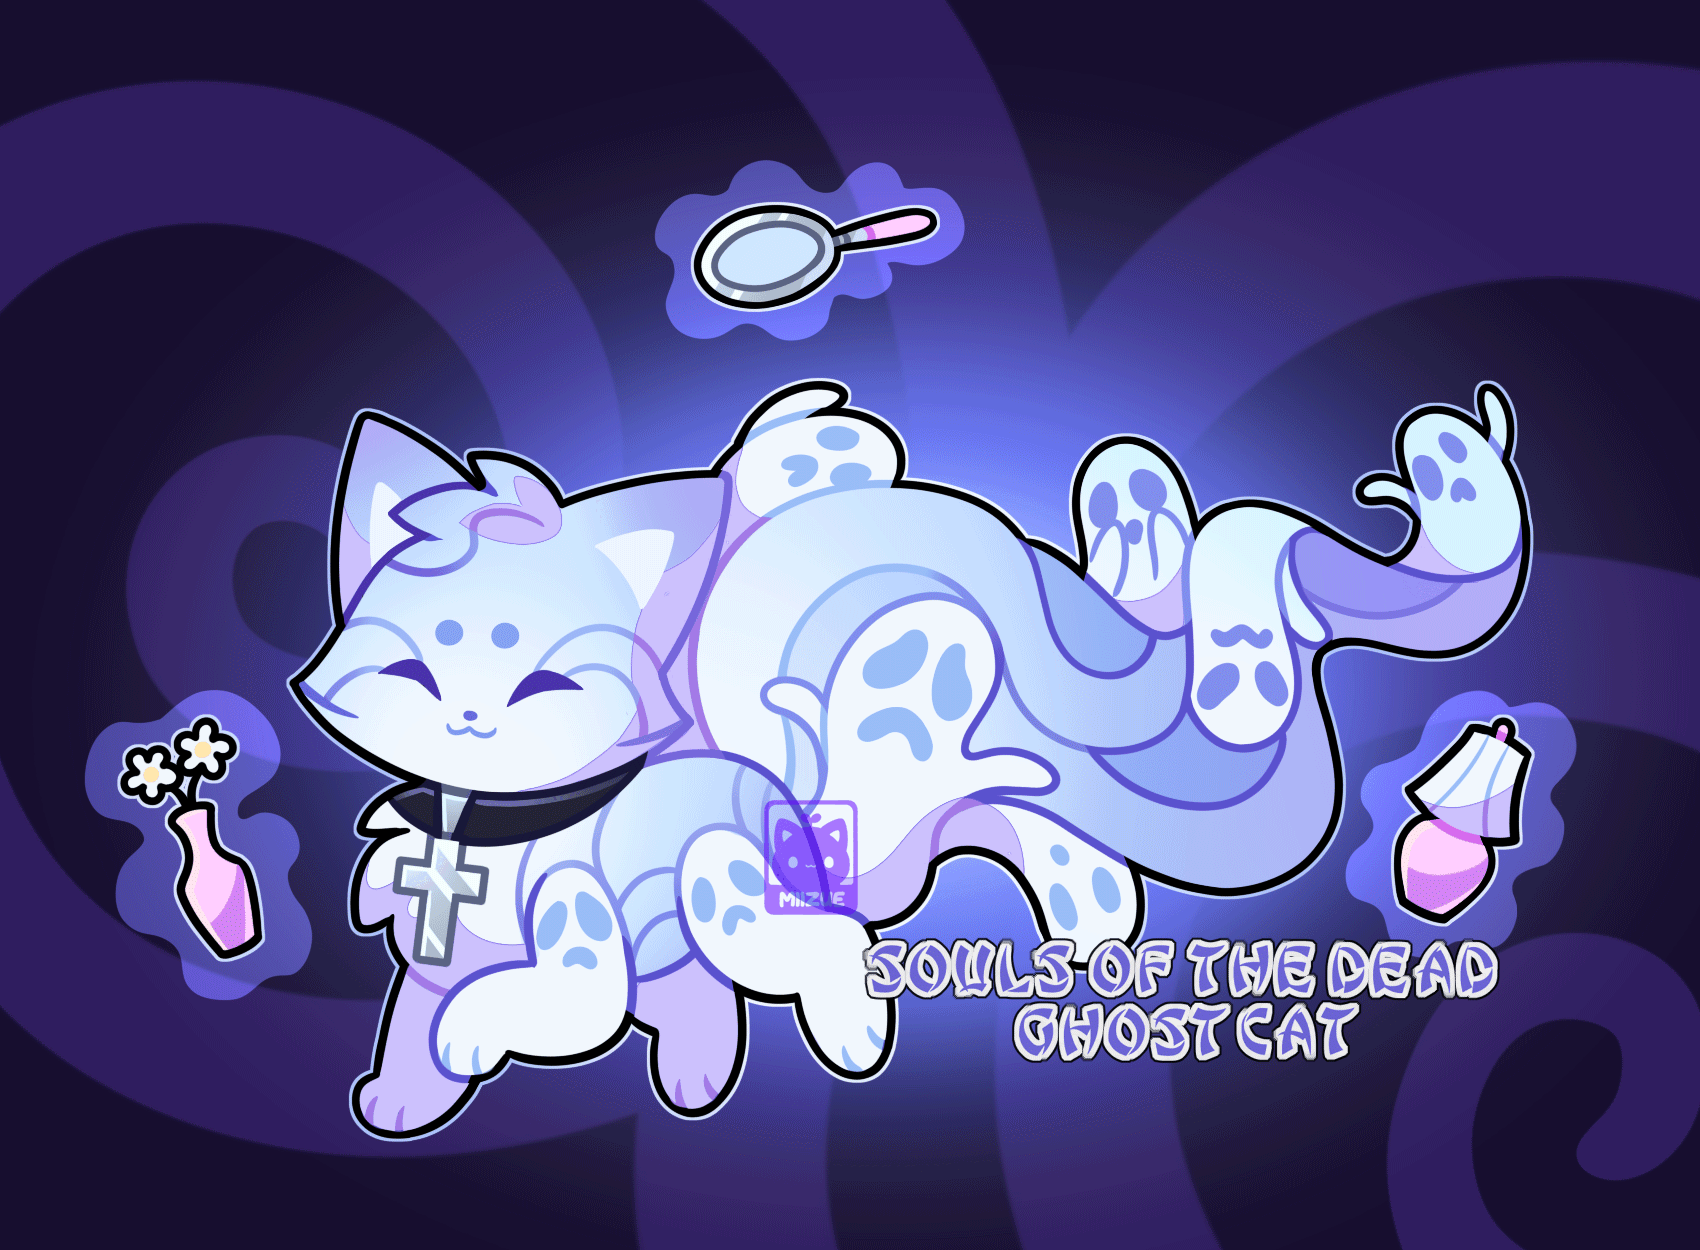 Ghost Pup Gif by DoctorMori on DeviantArt